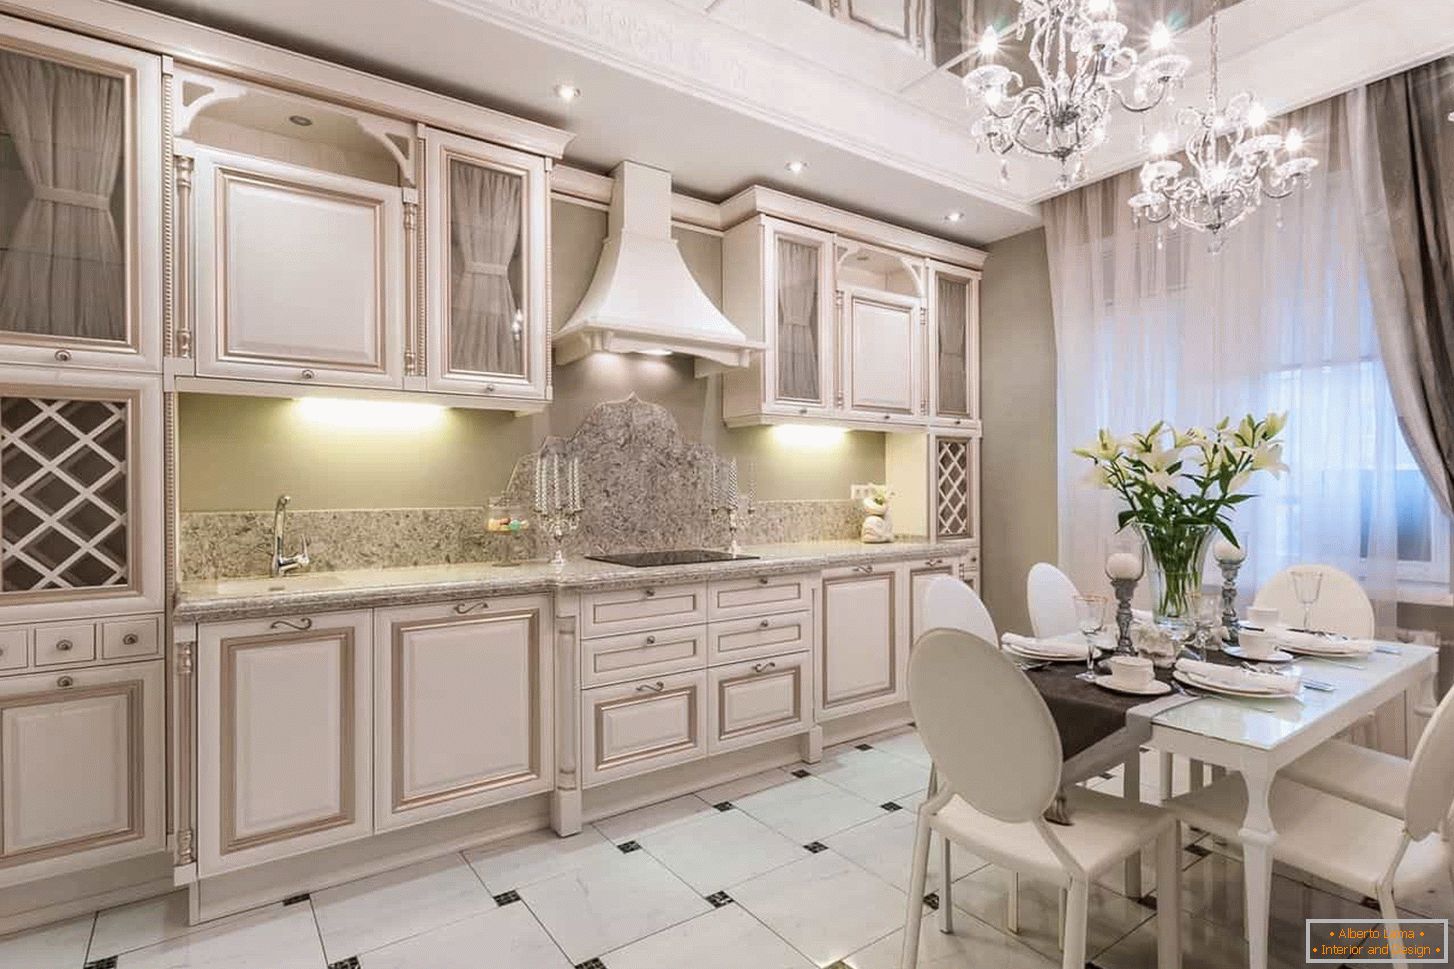 Kitchen decor in classical style